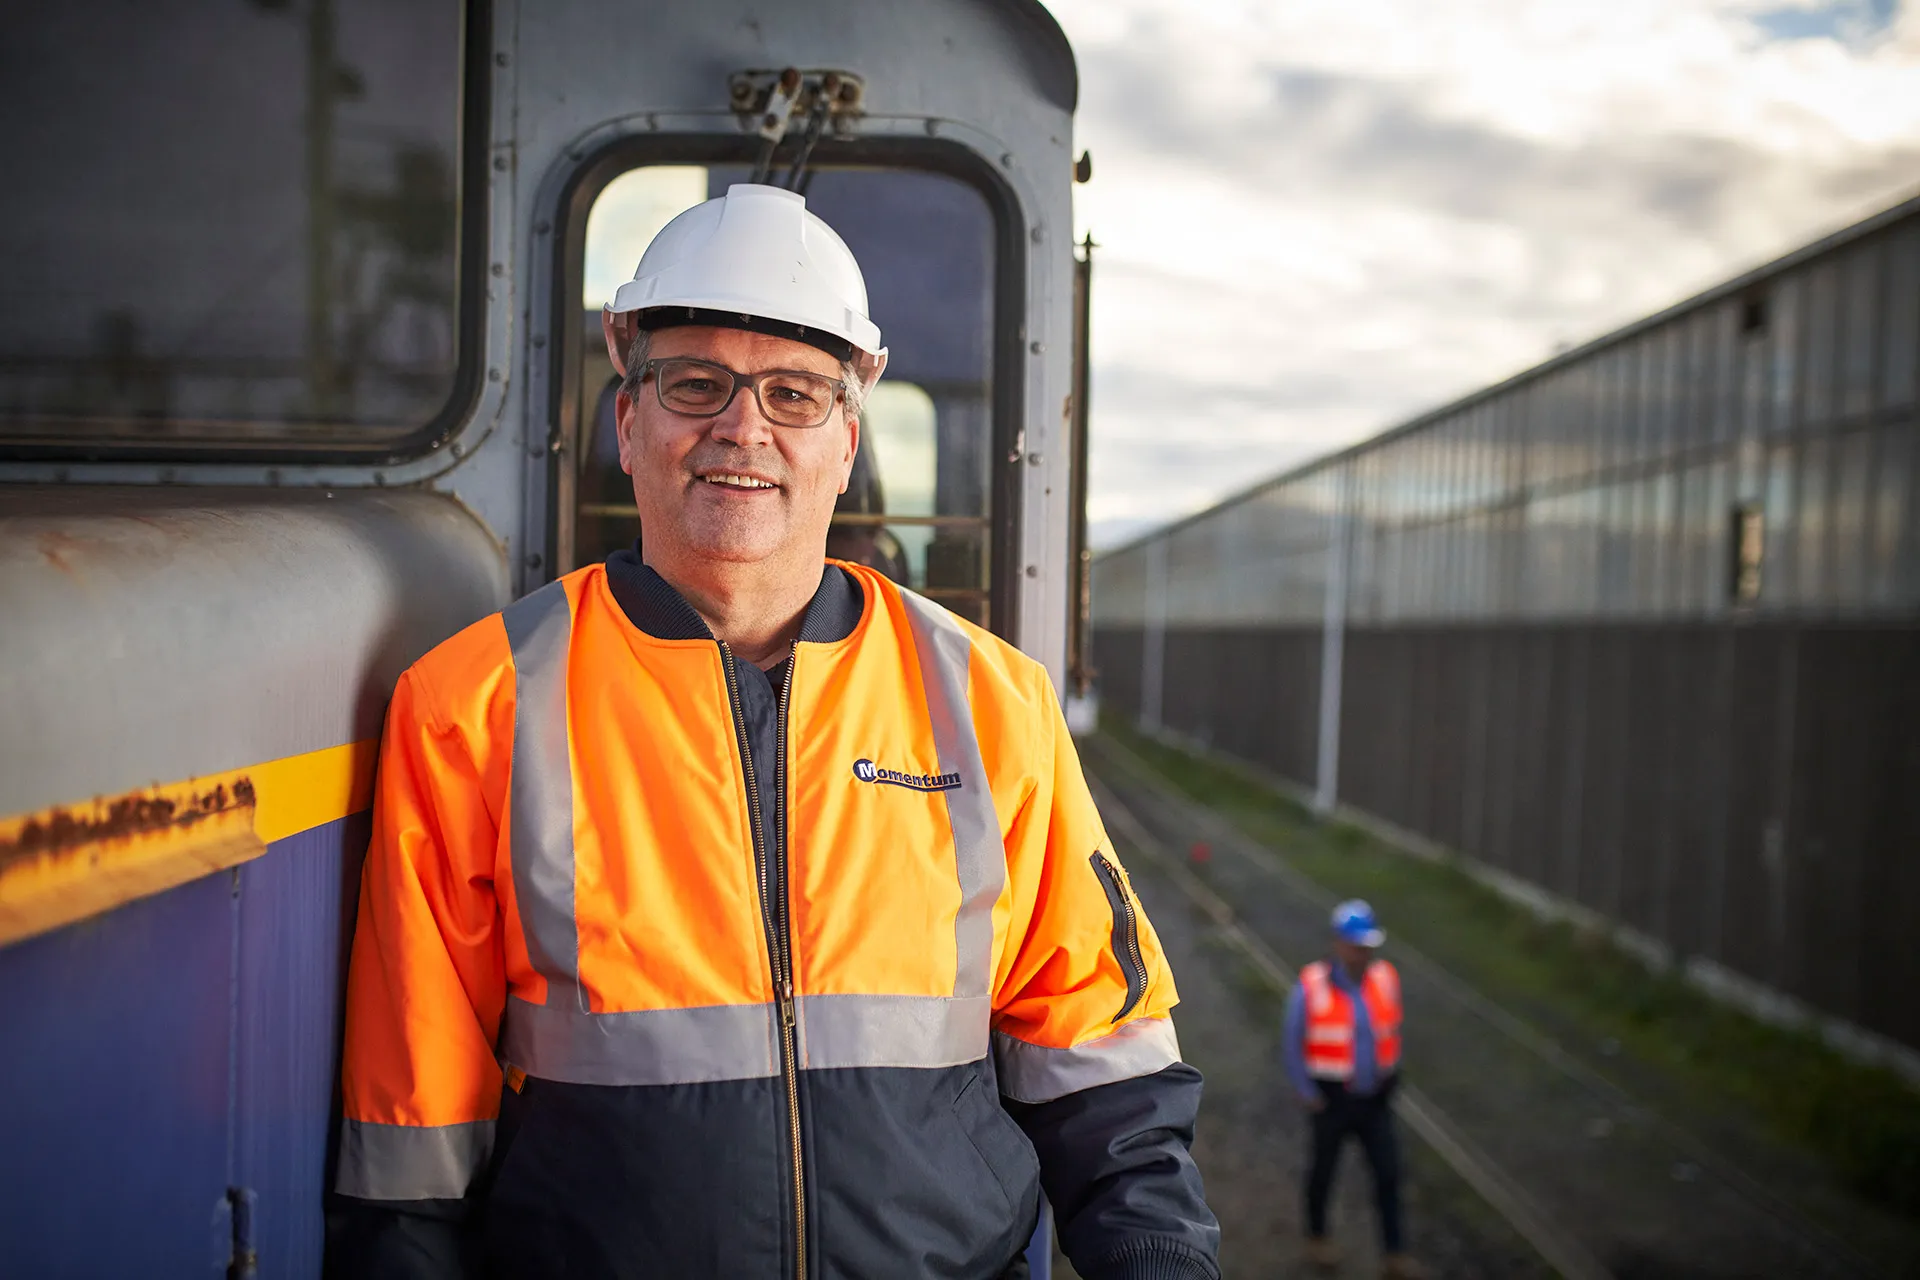 How much does a Train Engineer make?